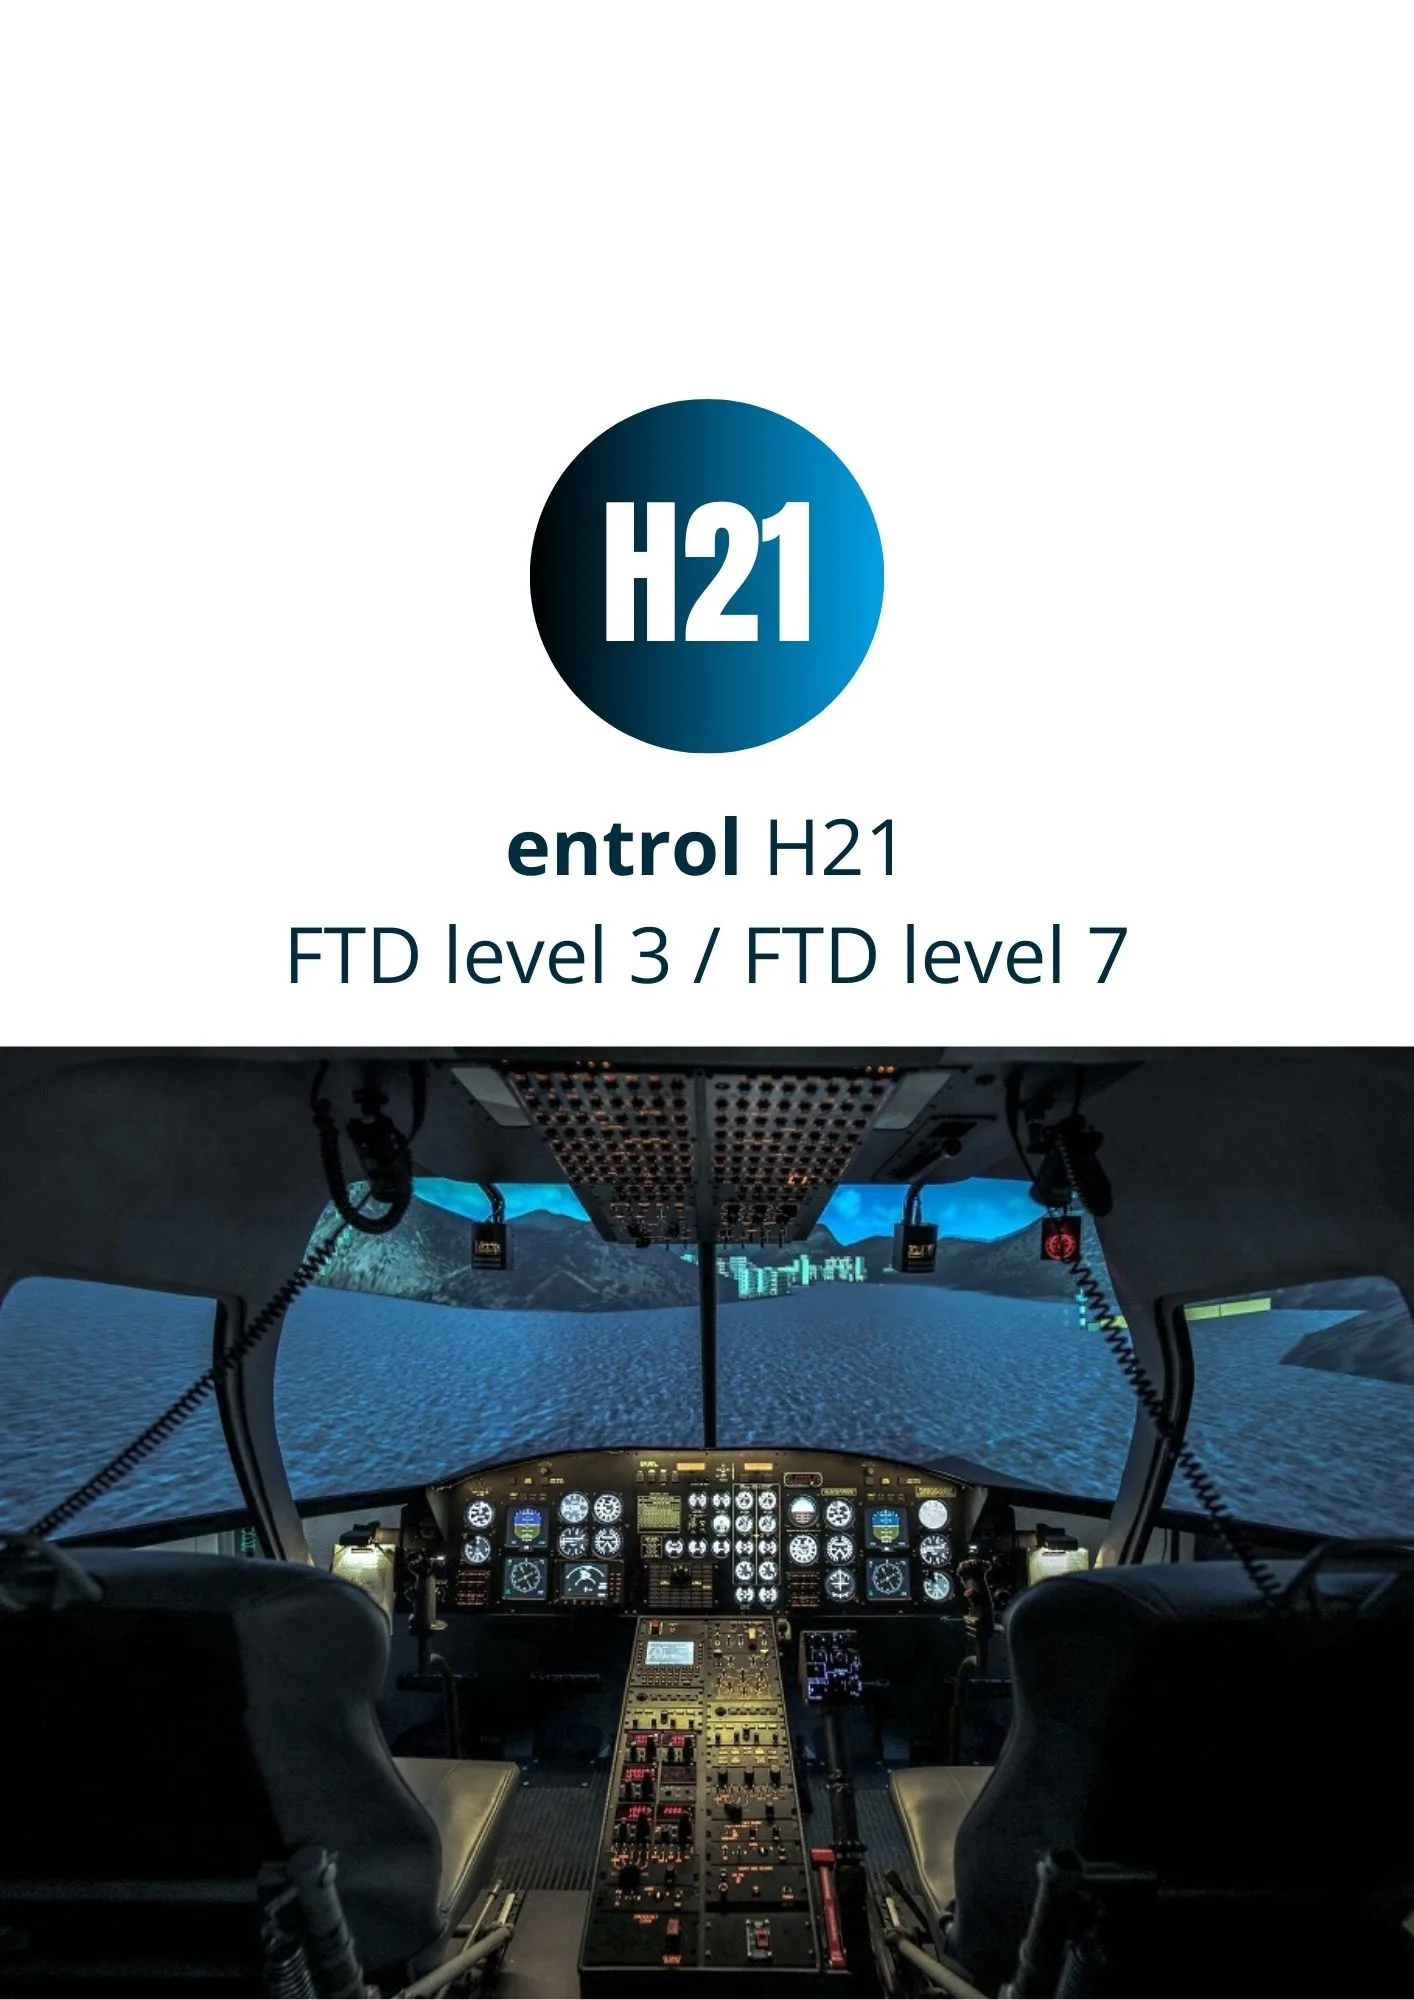 GHS purchases a brand new H21 FTD level 3